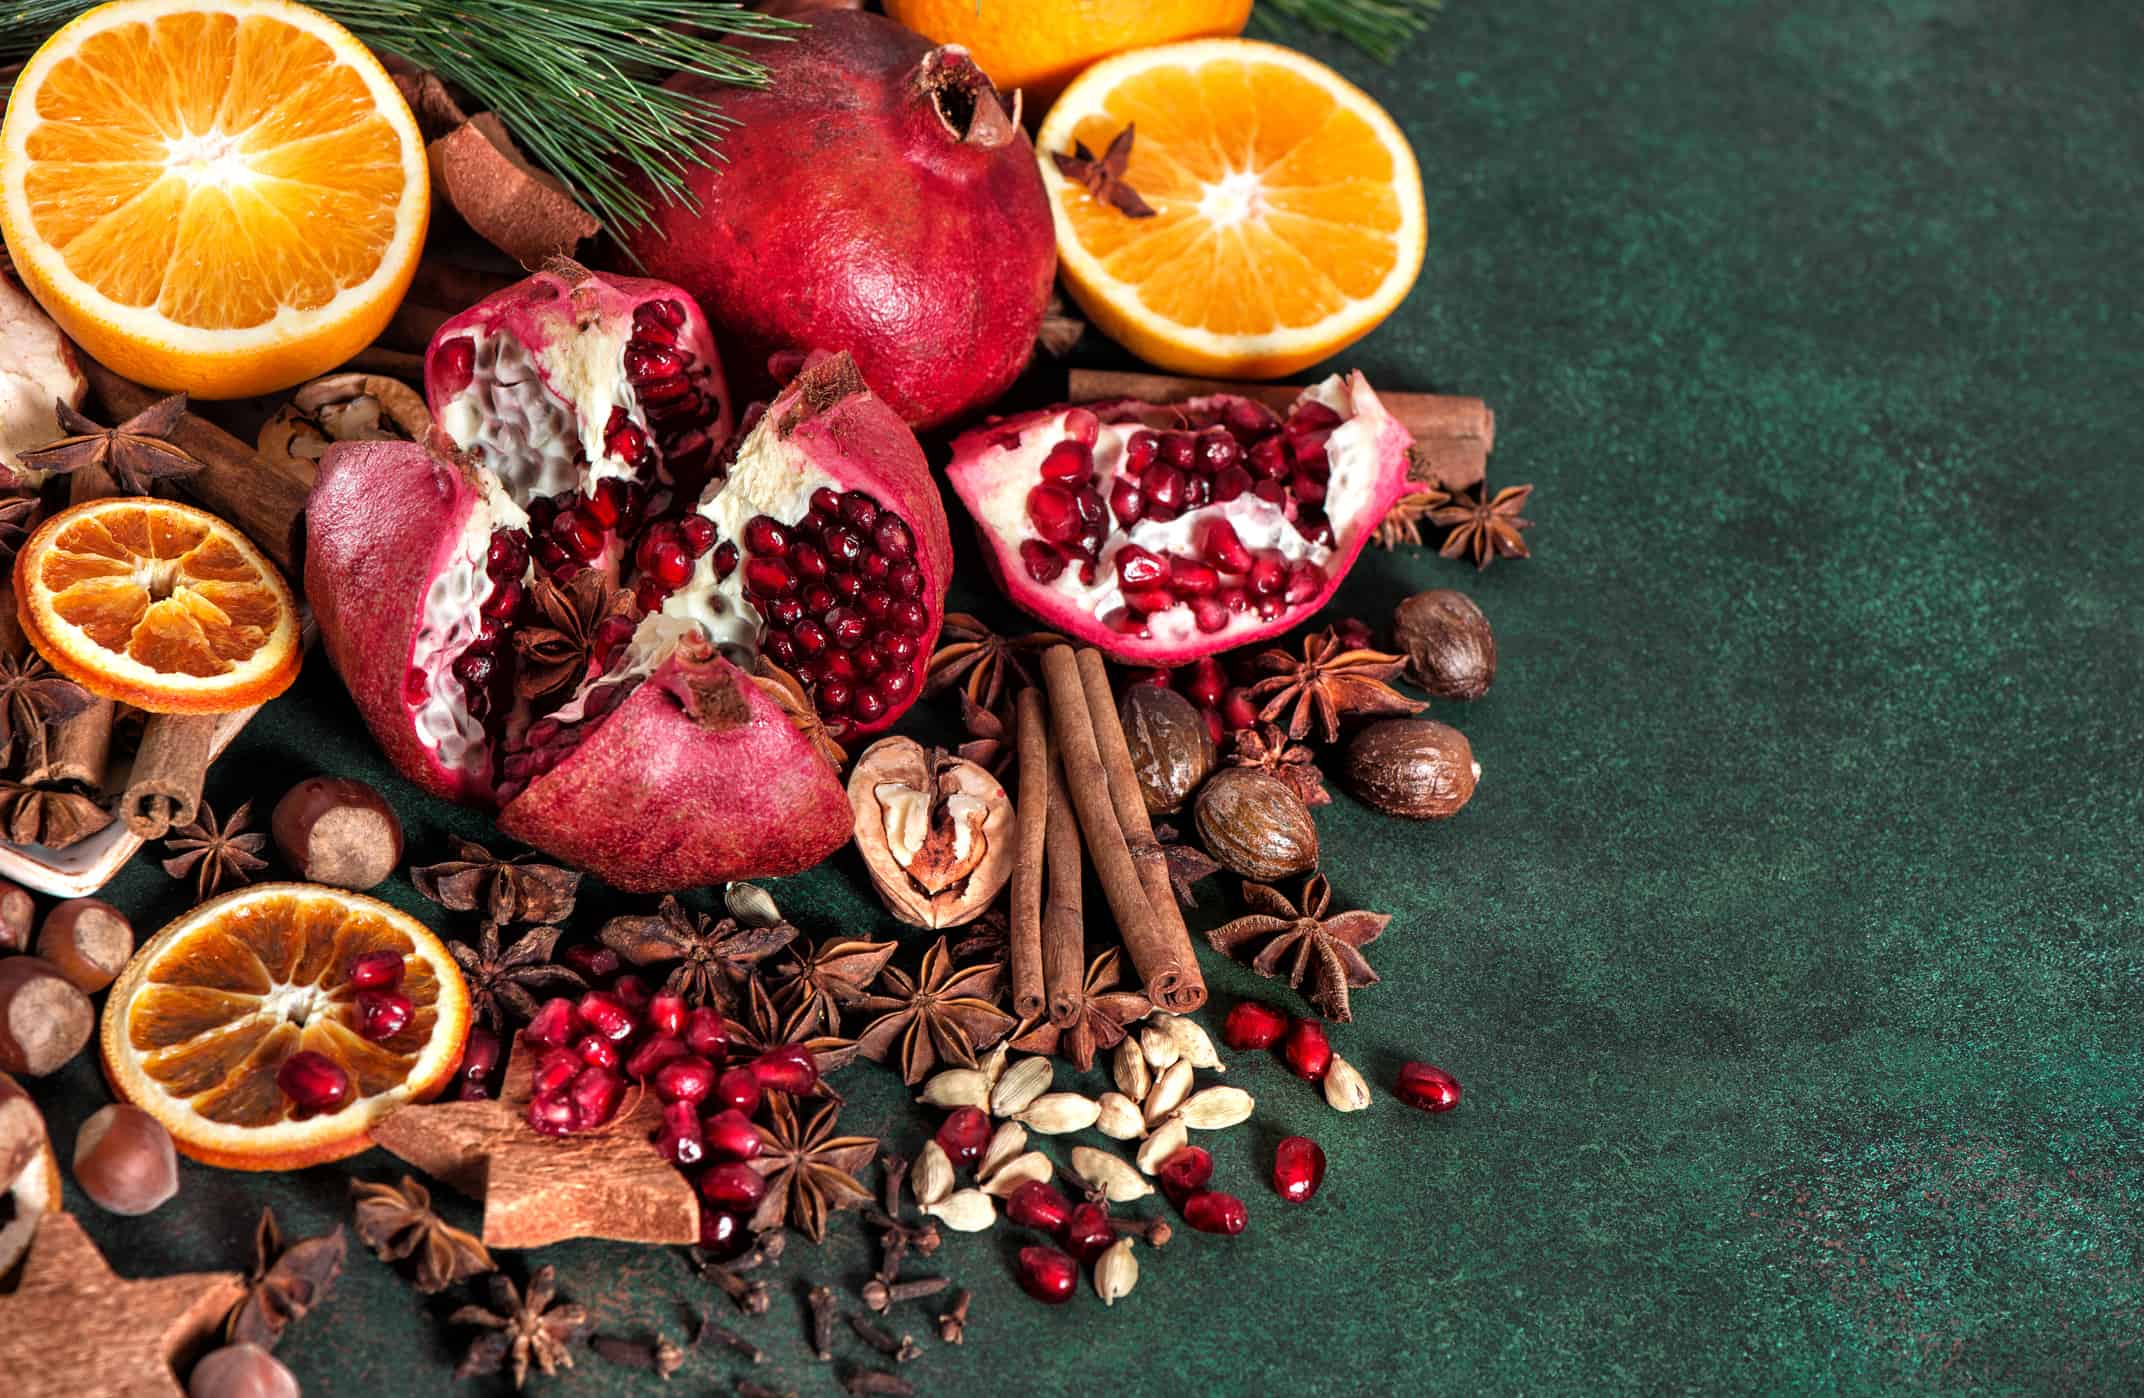 Fruits pomegranate orange spices ingredients mulled wine